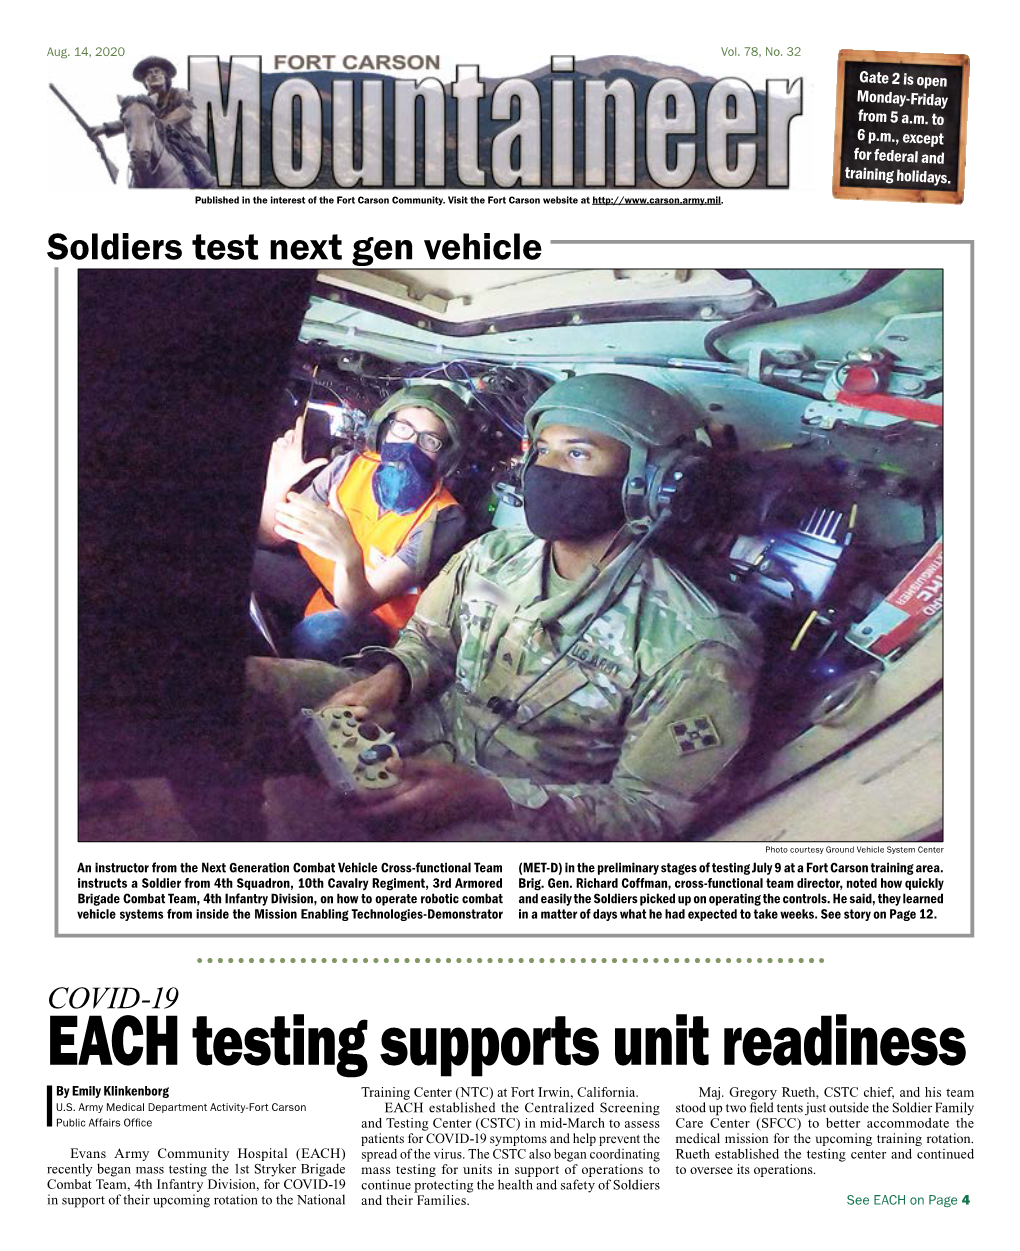 EACH Testing Supports Unit Readiness by Emily Klinkenborg Training Center (NTC) at Fort Irwin, California